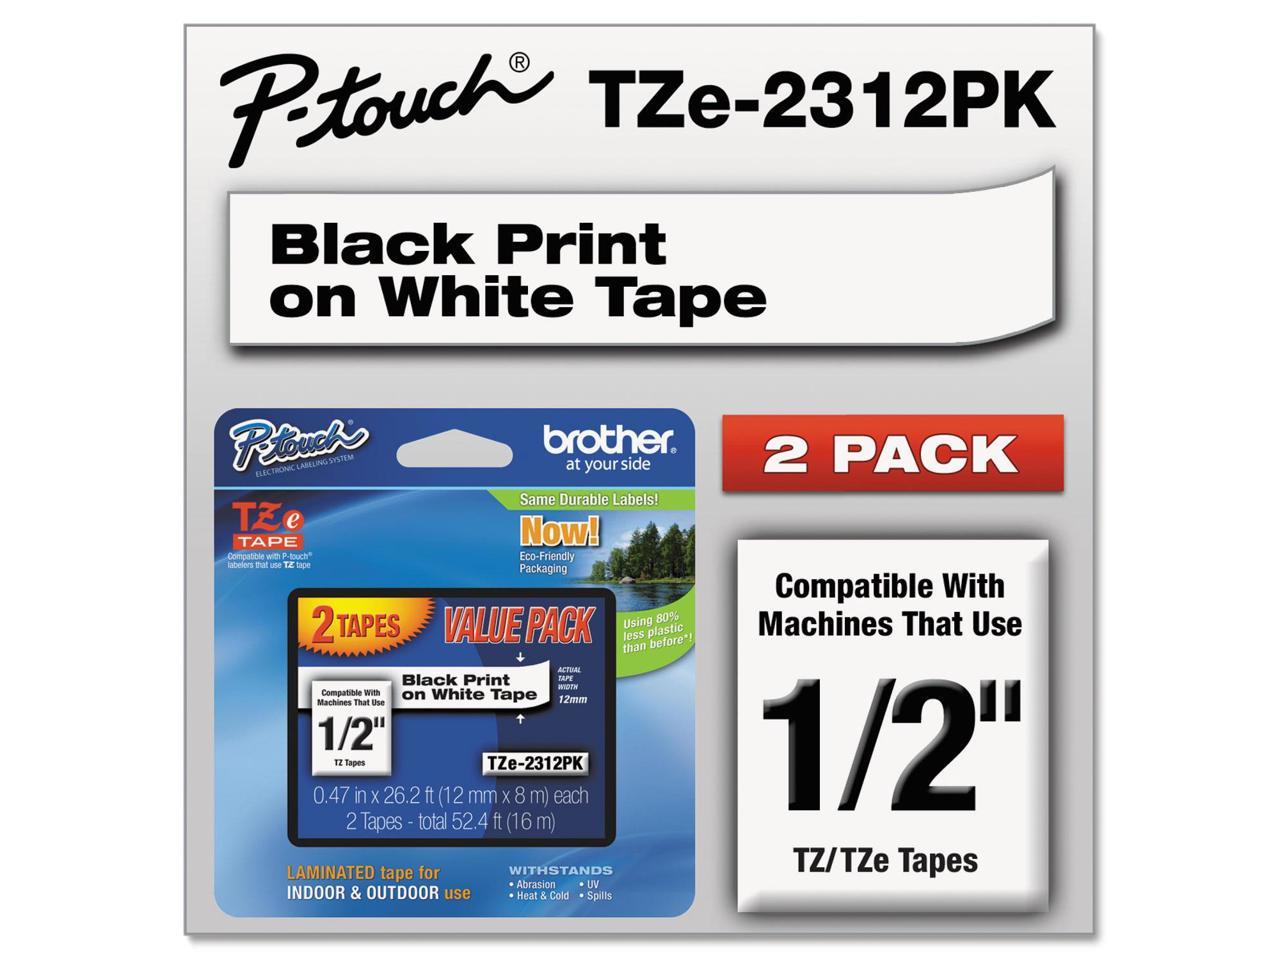 Brother TZE2312PK Black Print on Premium White Laminated Tape for P-touch Label Maker, 12mm (0.47") wide x 8m (26.2') long - 2/Pack